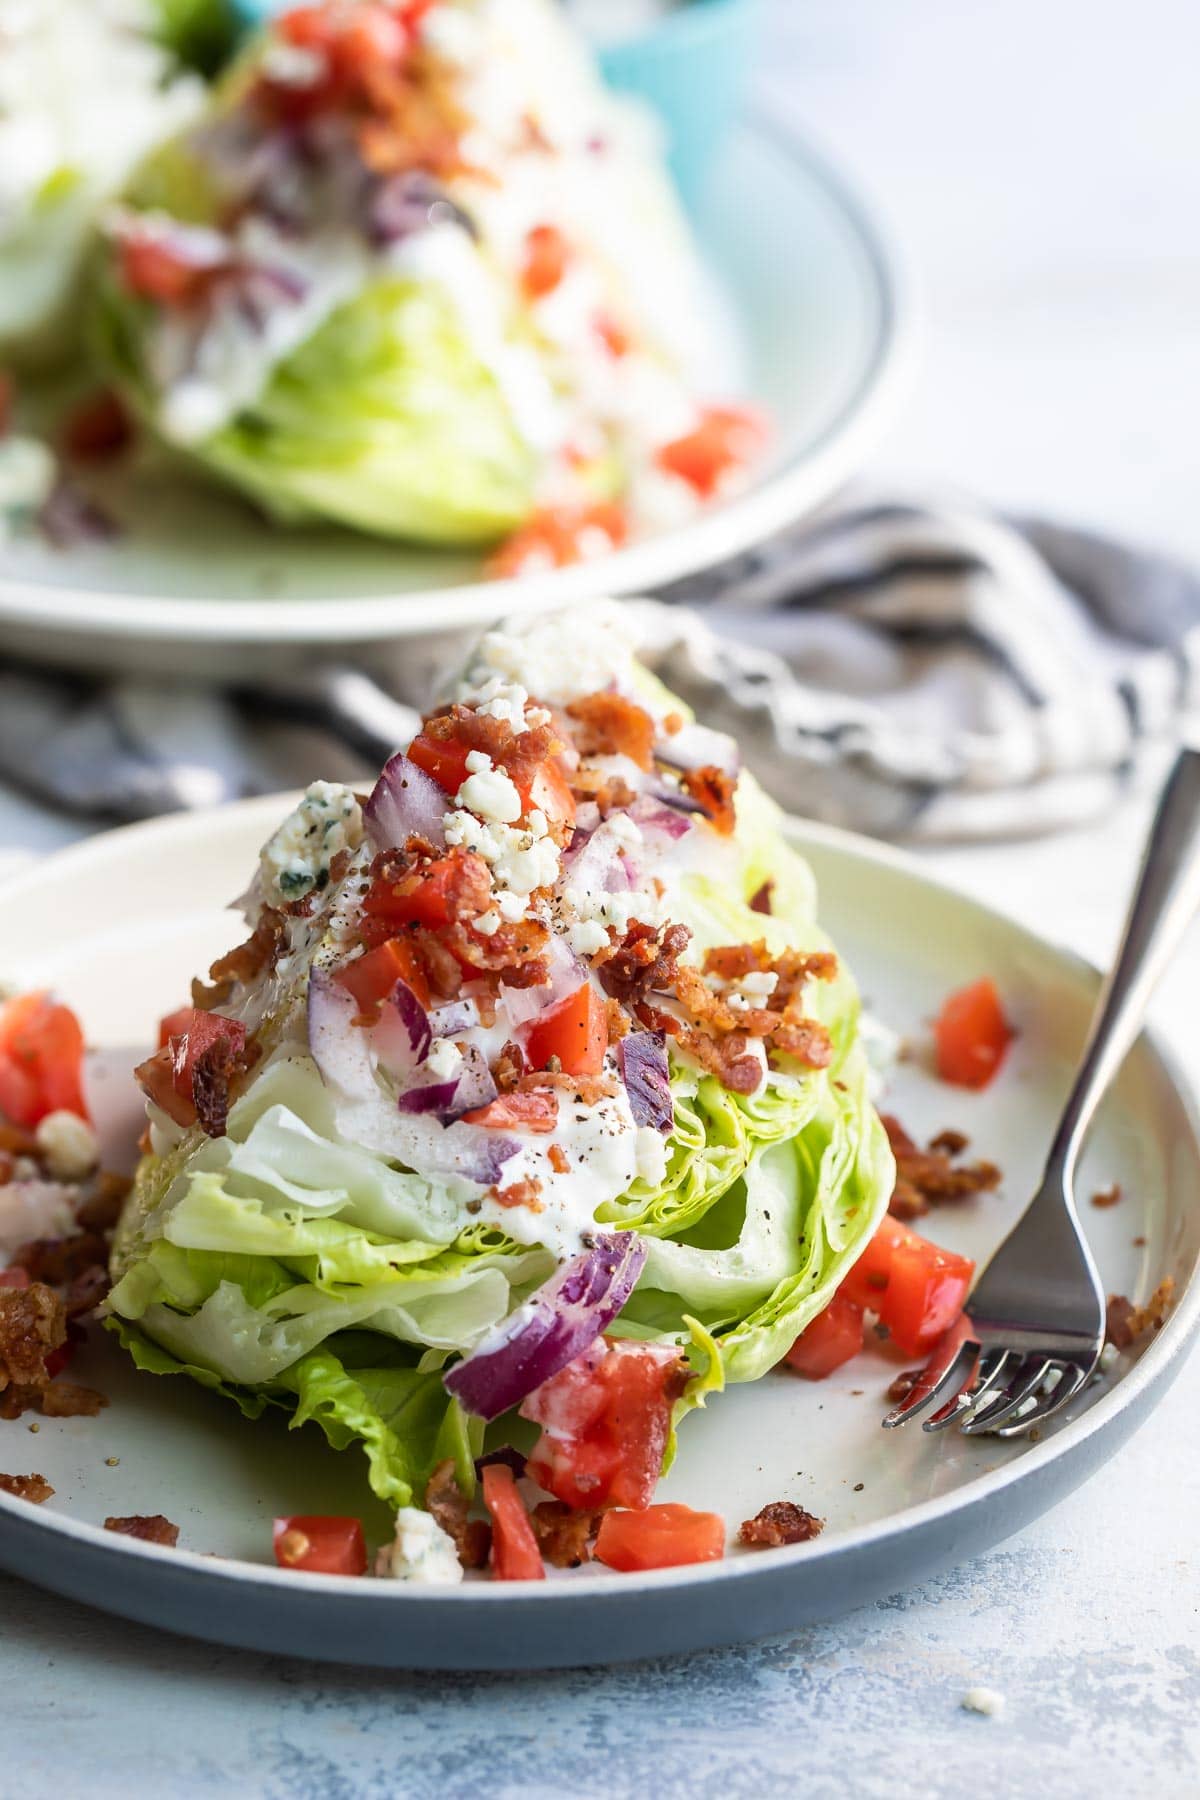 A wedge salad on a plate.